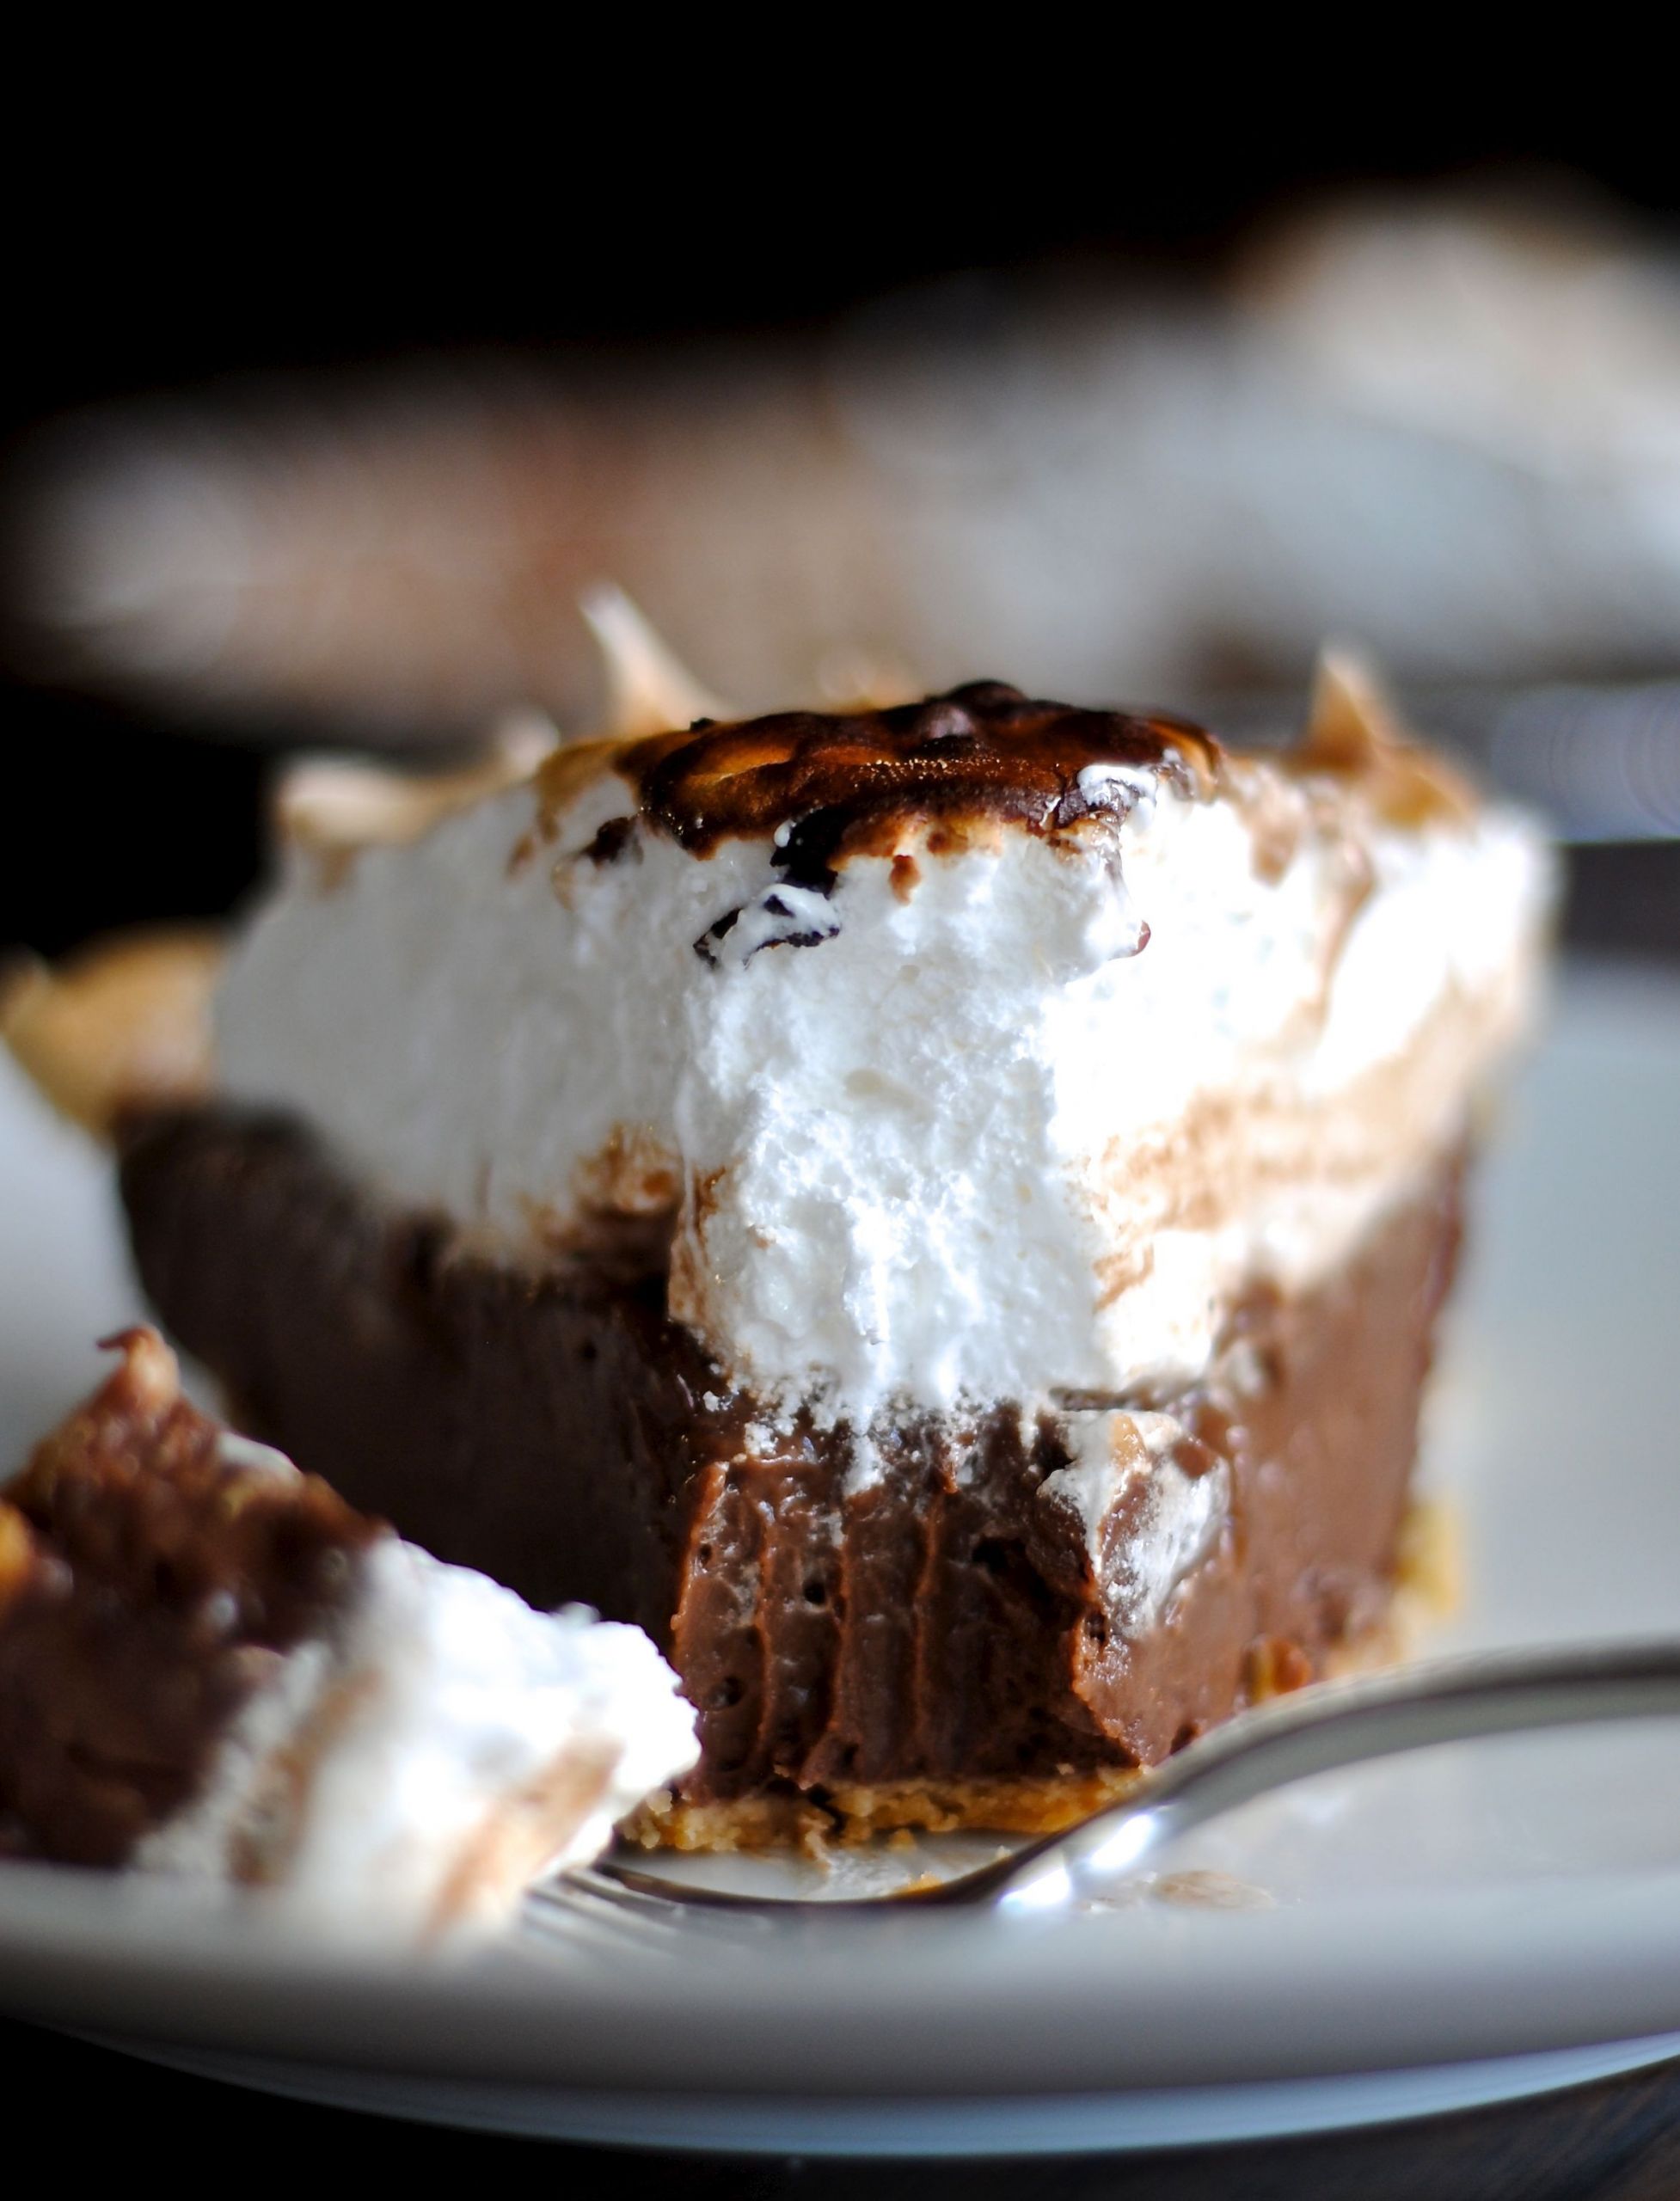 Chocolate Marshmallow Pie
 Chocolate Cream Pie with a Toasted Marshmallow Topping